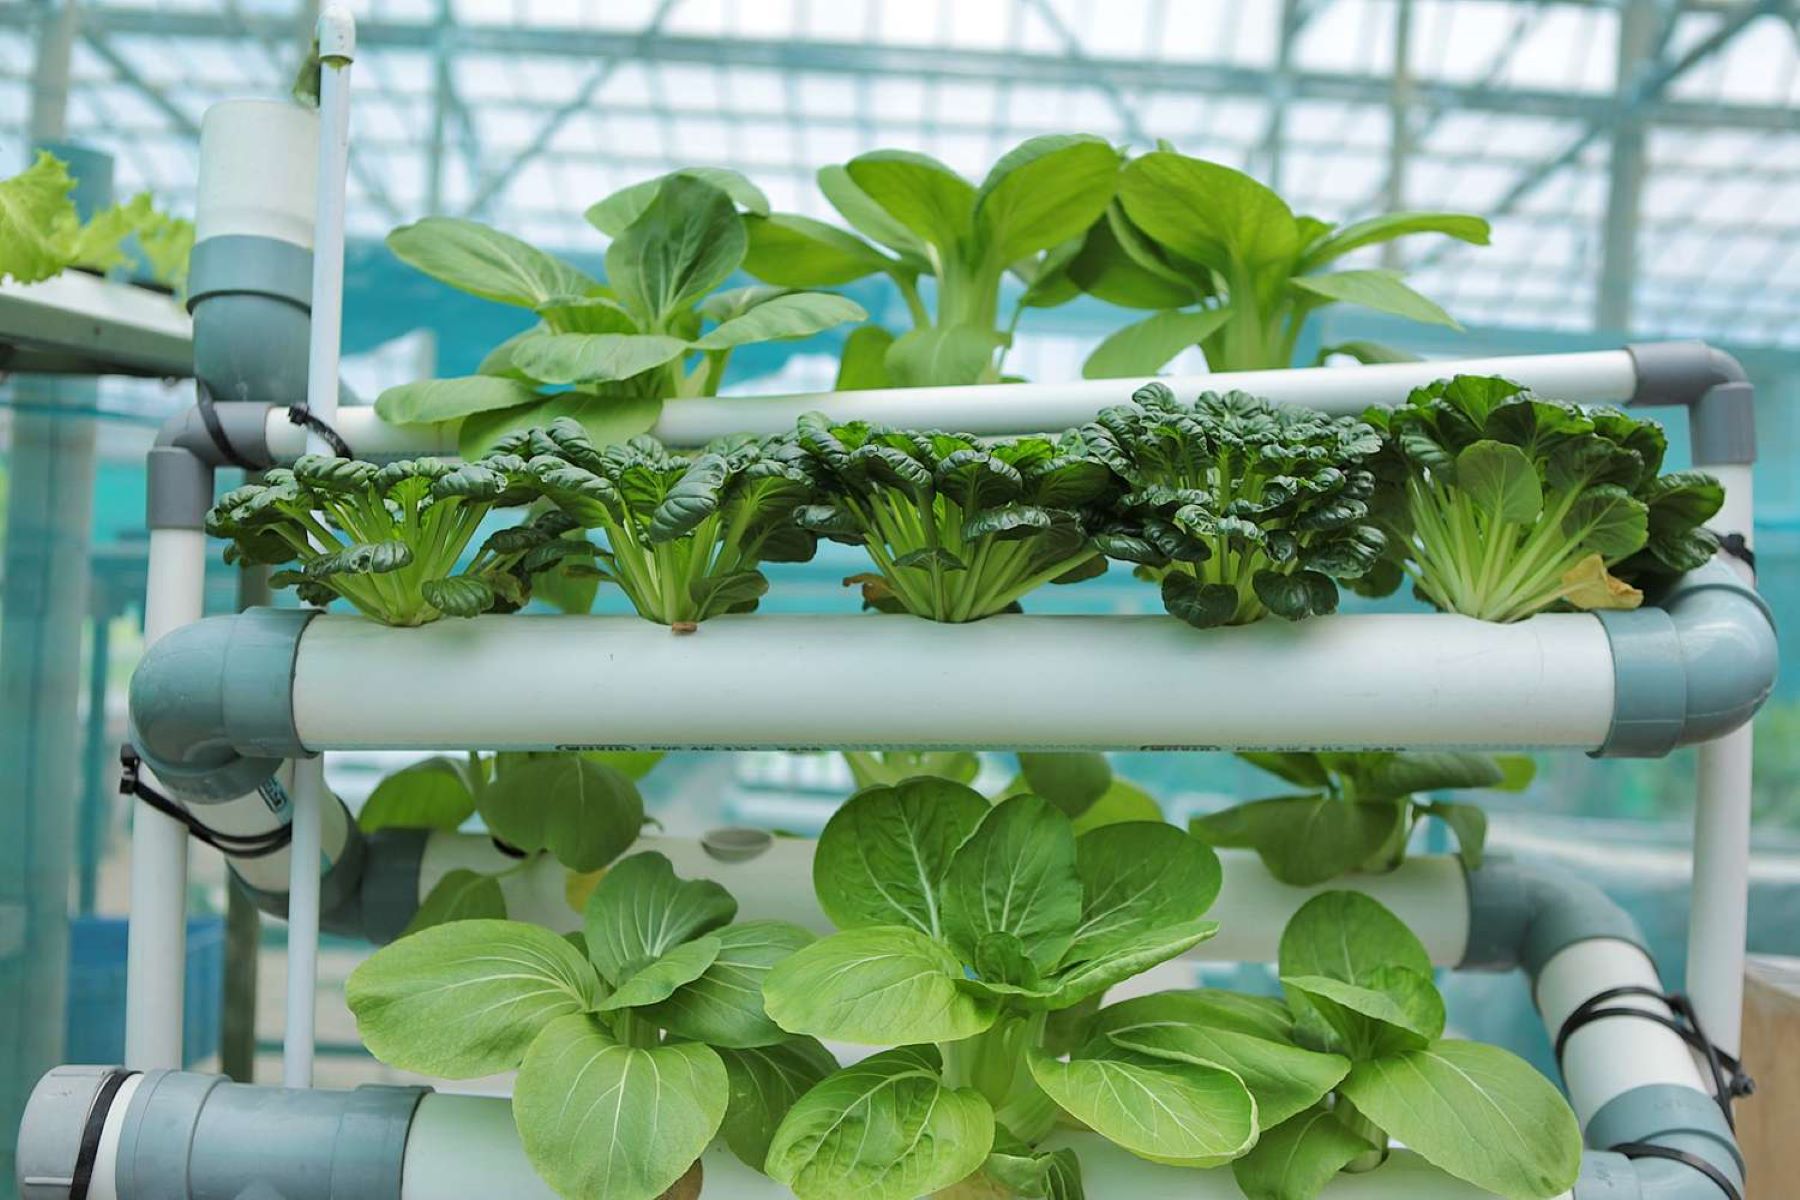 How To Make DIY Vertical Garden With PVC Pipe Hydroponics